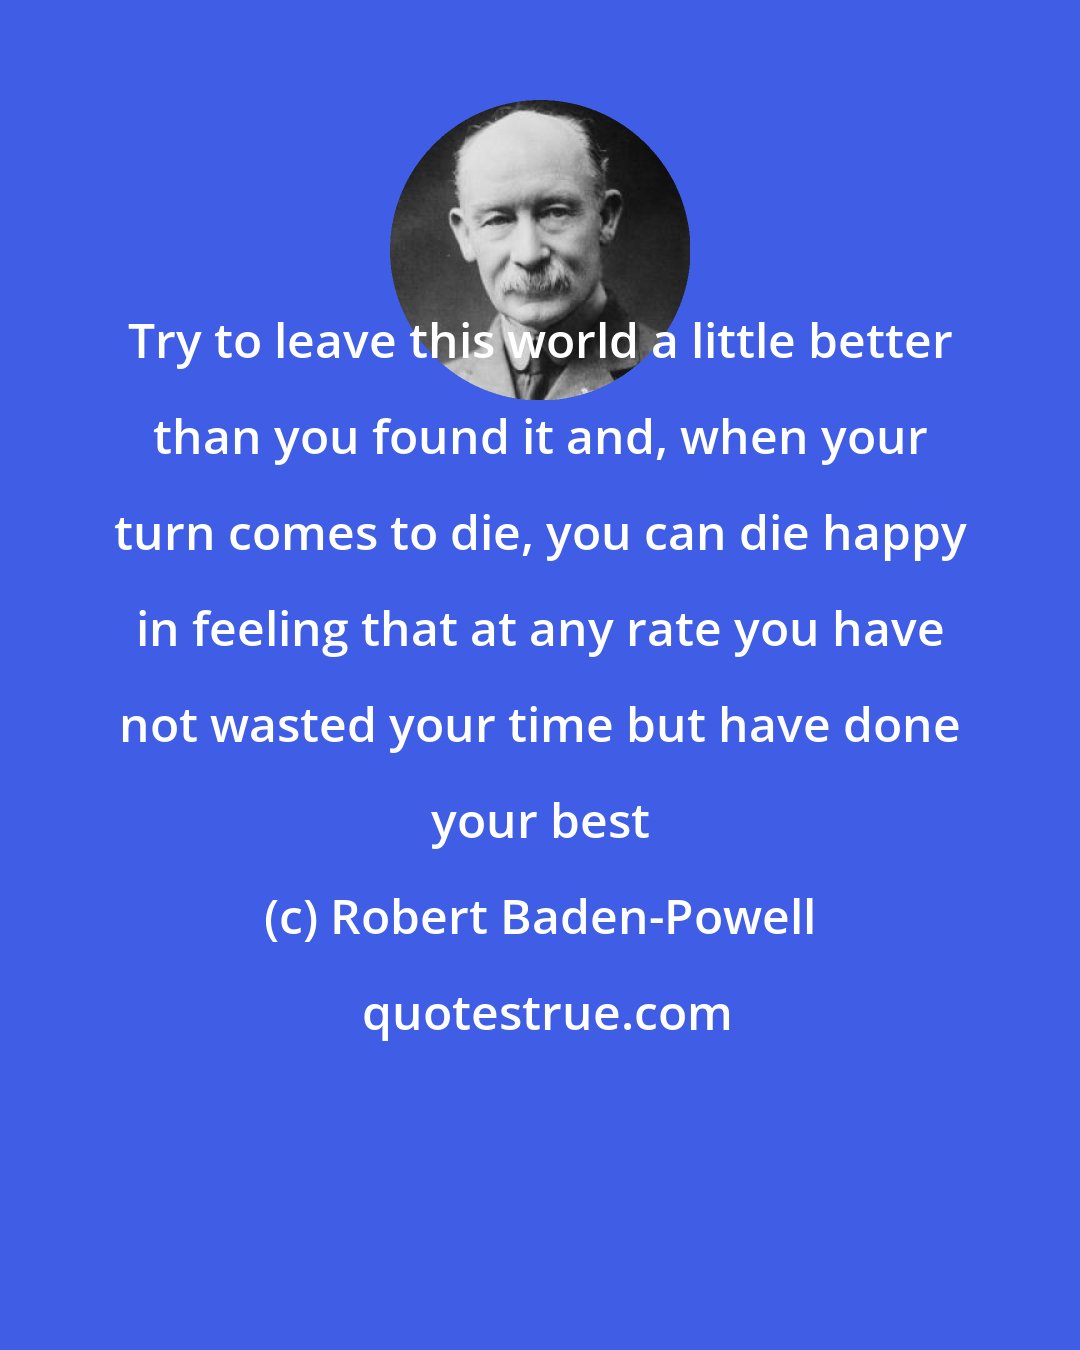 Robert Baden-Powell: Try to leave this world a little better than you found it and, when your turn comes to die, you can die happy in feeling that at any rate you have not wasted your time but have done your best